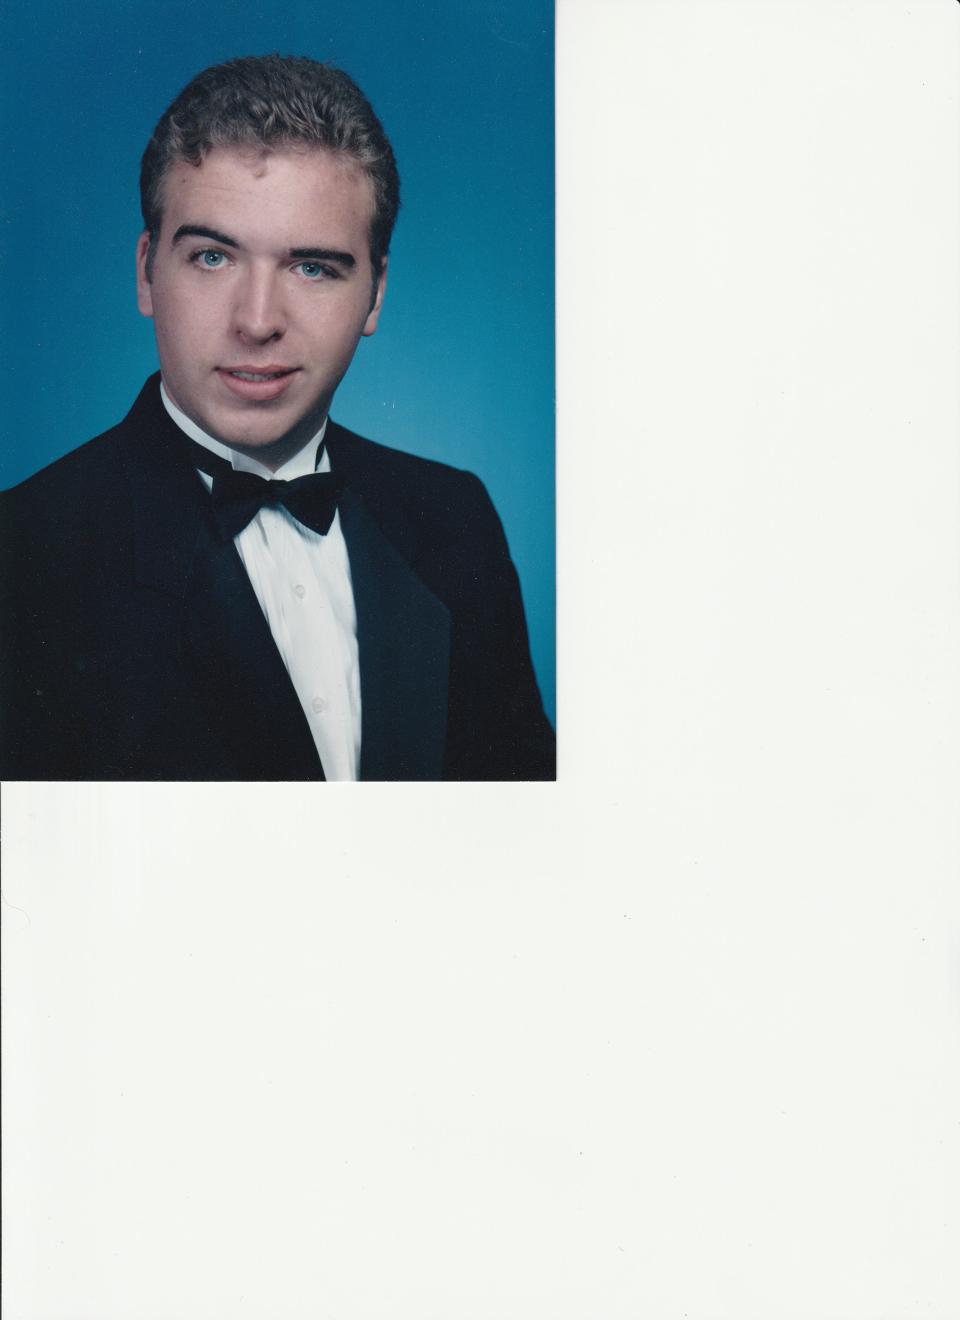 Gregory Marquis in his senior high school picture from 2004.